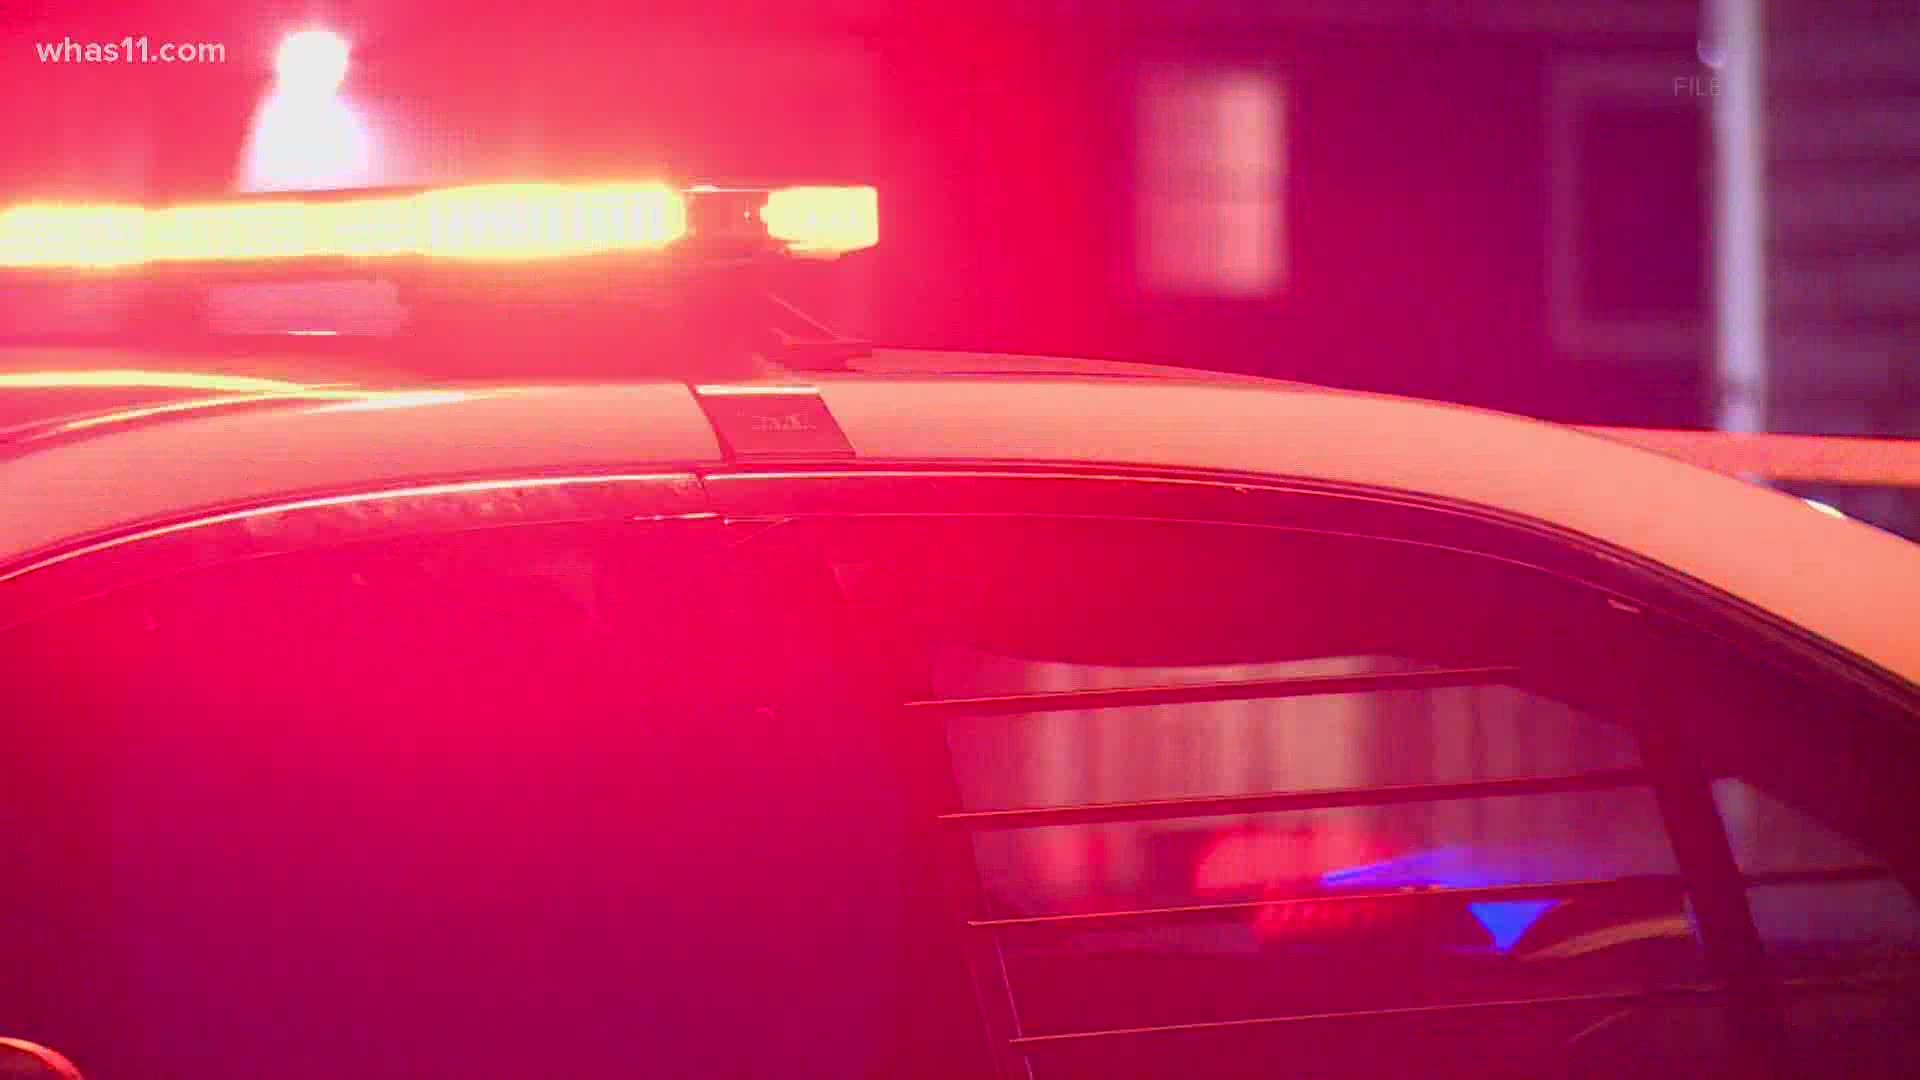 After a Kentucky man was charged in connection to the notorious gang, WHAS11 News went to the Louisville FBI to see how they're combating gang violence in the metro.